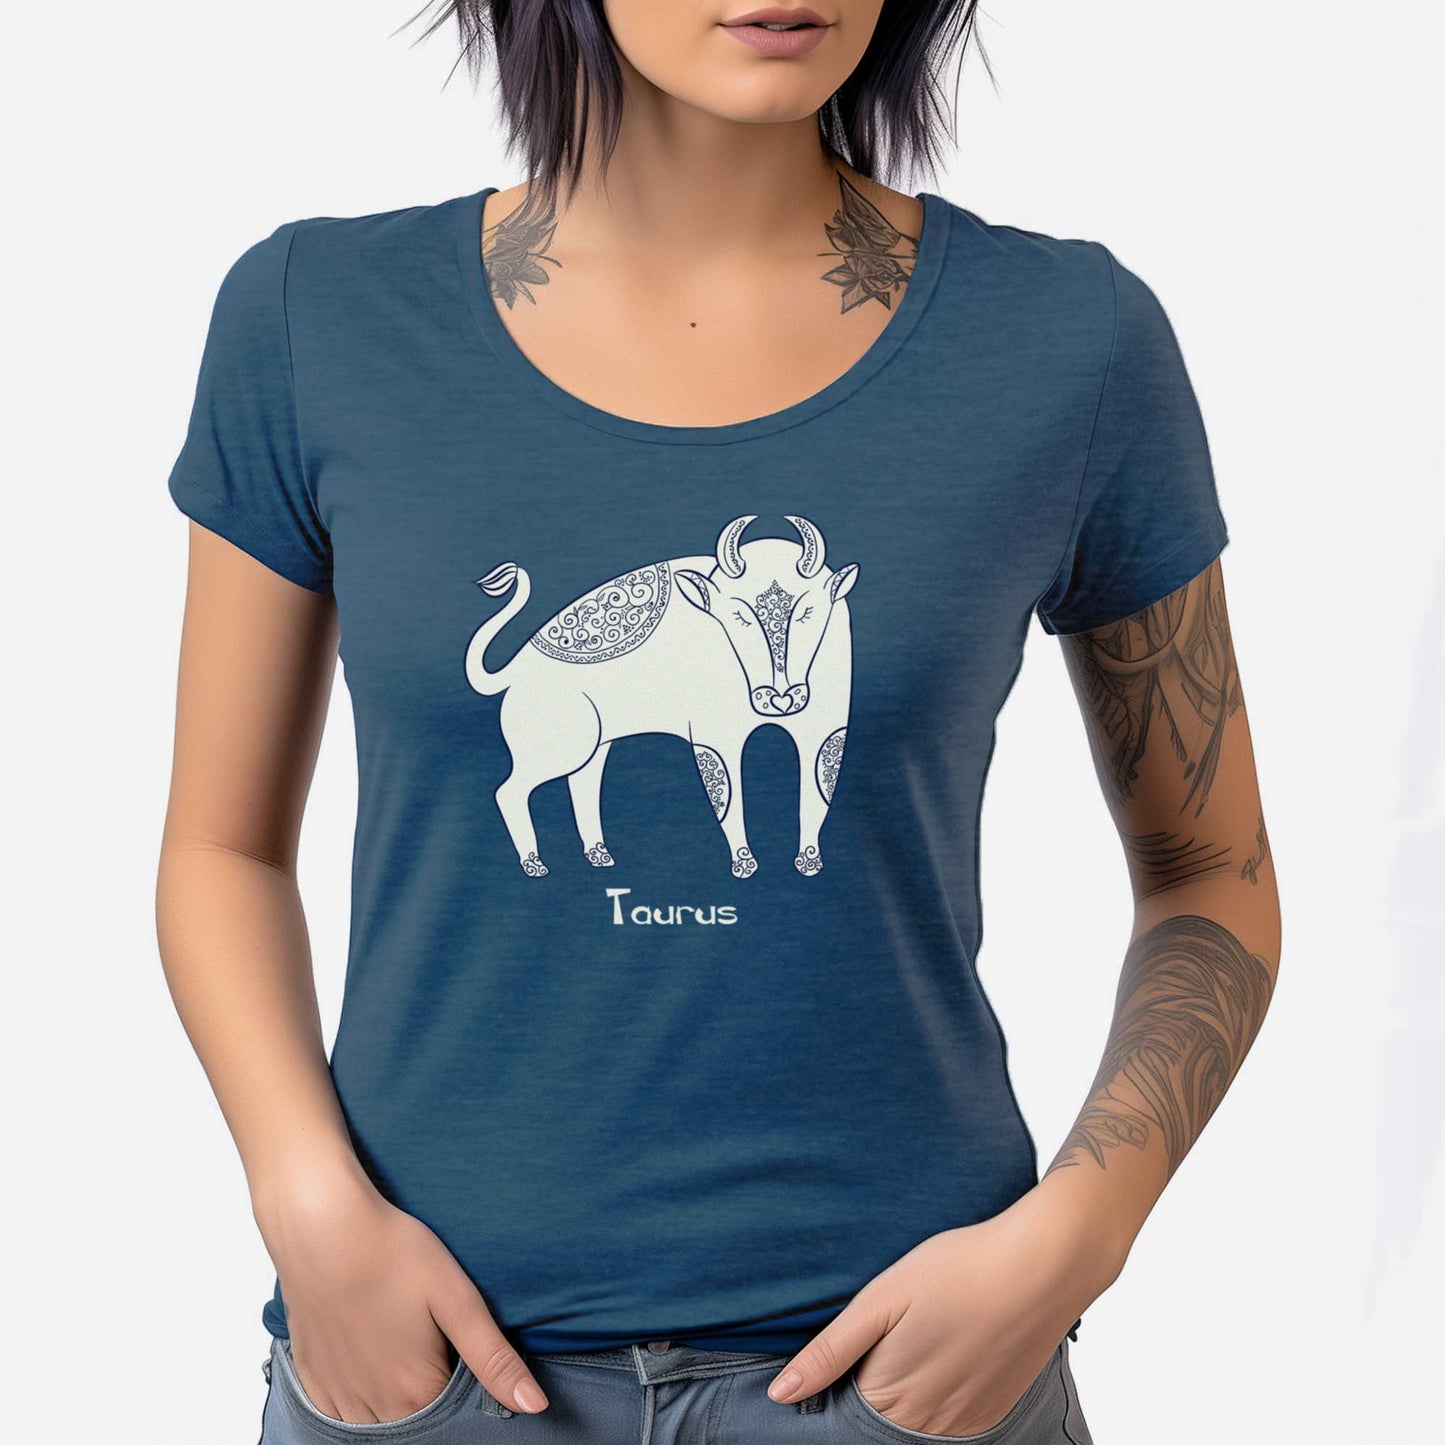 A woman wearing a heathered neptune District 7501 scoop neck t-shirt featuring the zodiac symbol of Taurus, the bull, in a Mediterranean style.